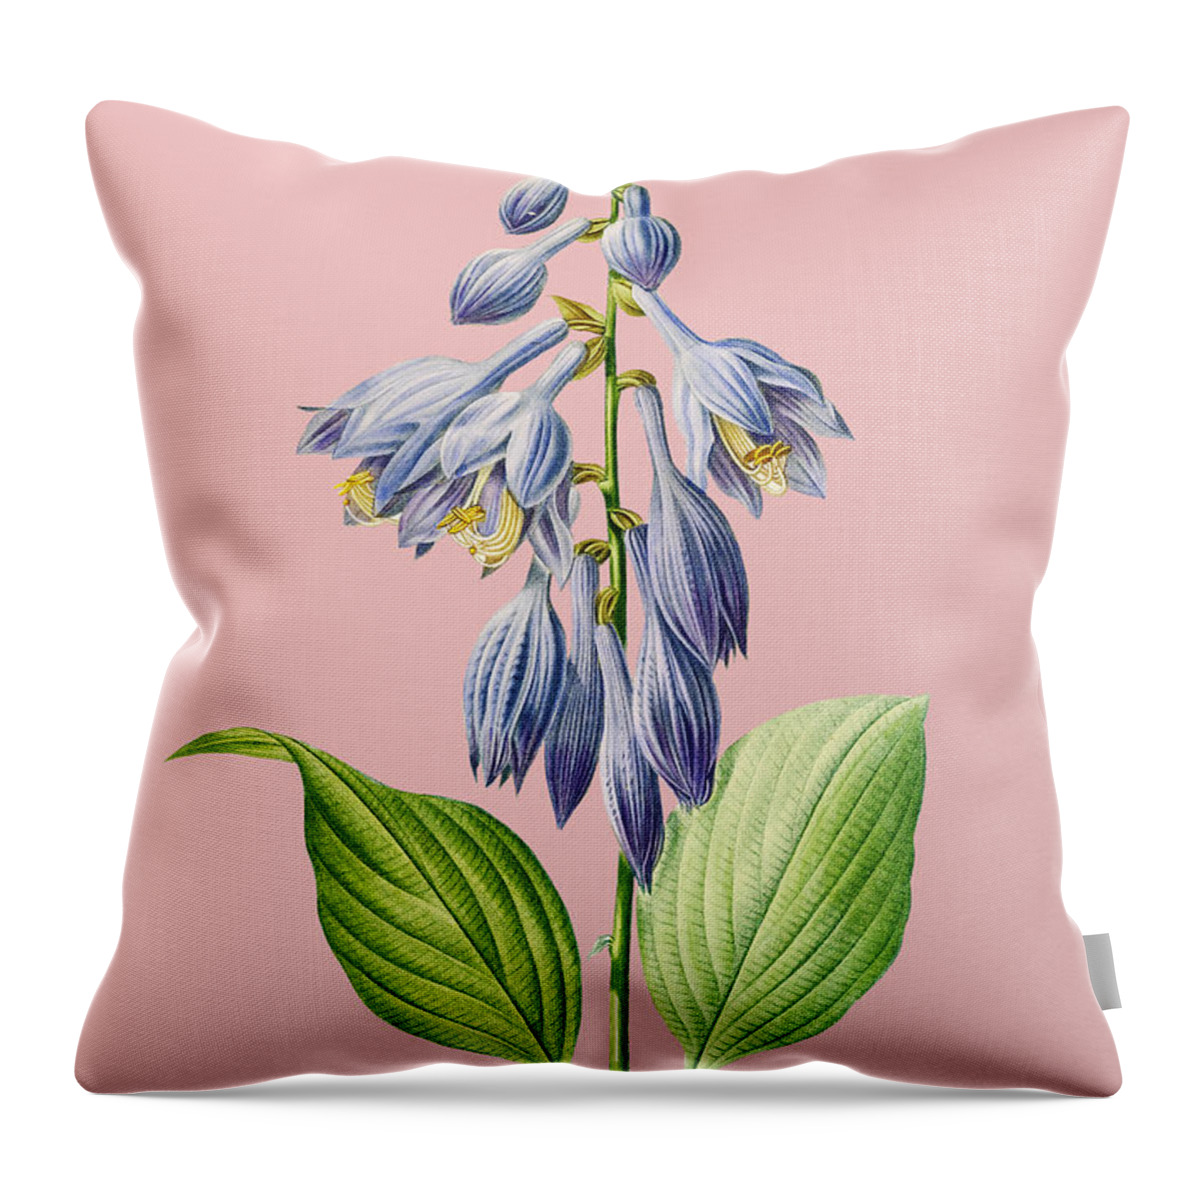 Holyrockarts Throw Pillow featuring the mixed media Vintage Blue Daylily Botanical Illustration on Pink by Holy Rock Design